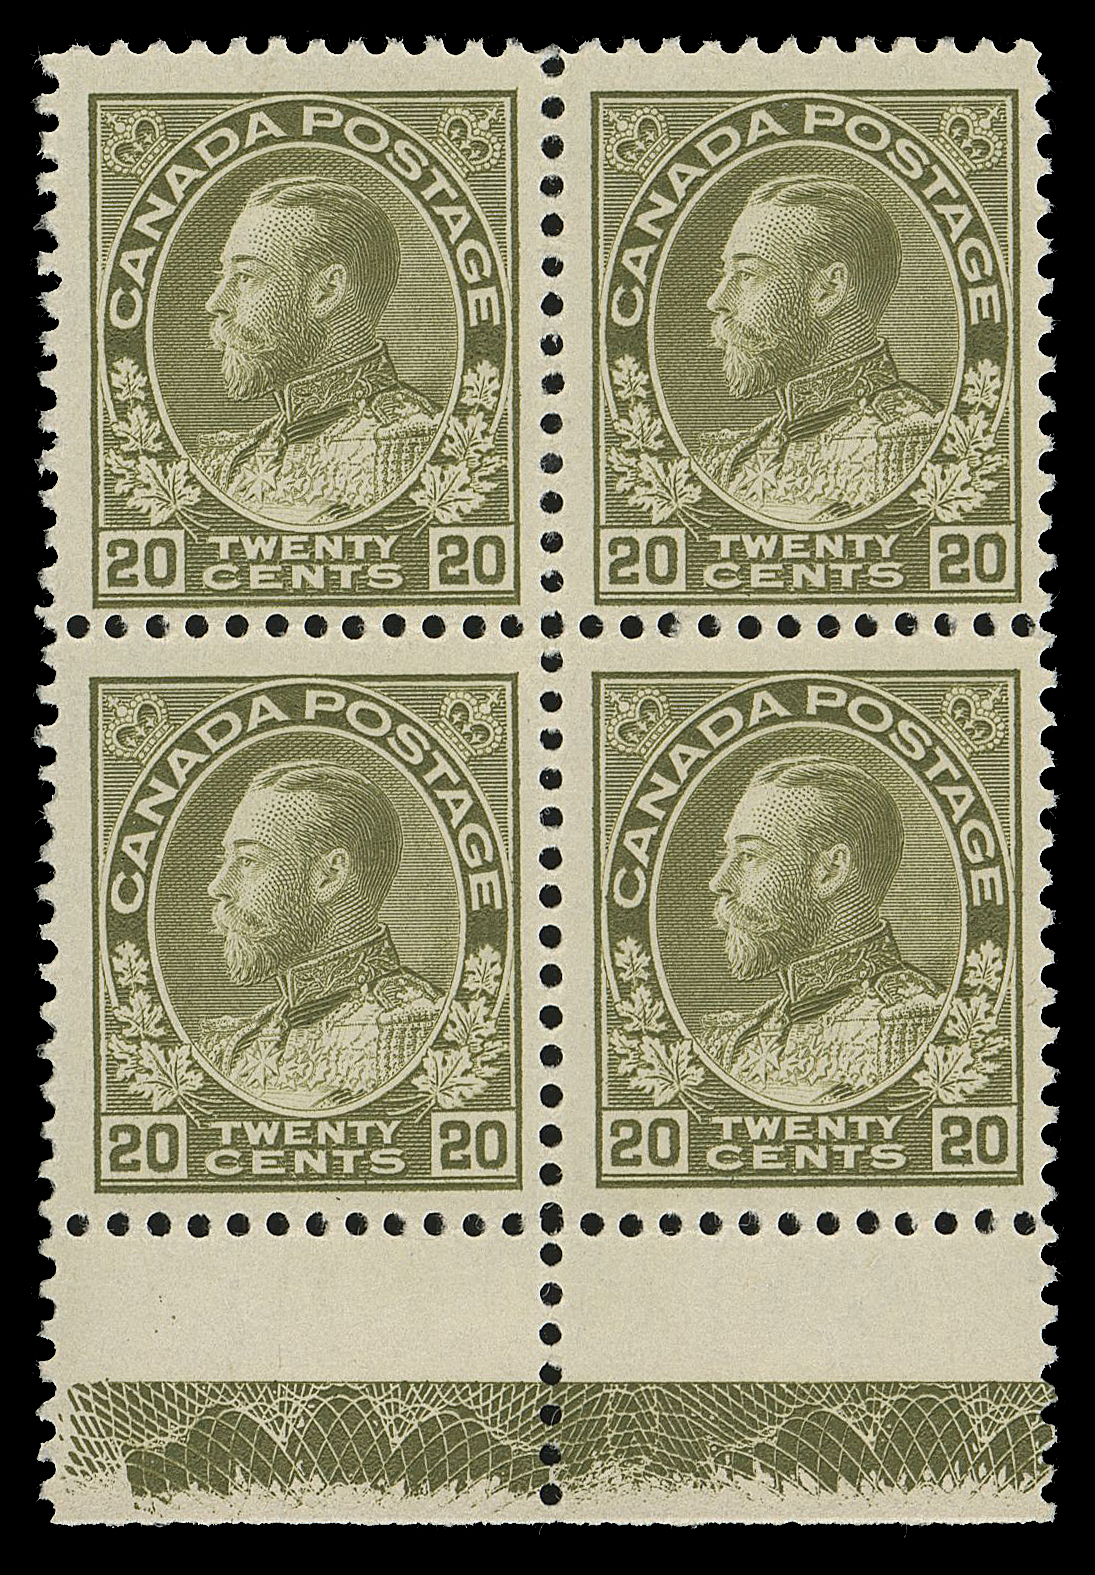 ADMIRAL STAMPS  119,A choice, nicely centered mint block with Type D (80% strength) lathework, both lathework stamps are NH; an attractive block, VF LH (Unitrade cat. as two NH singles)